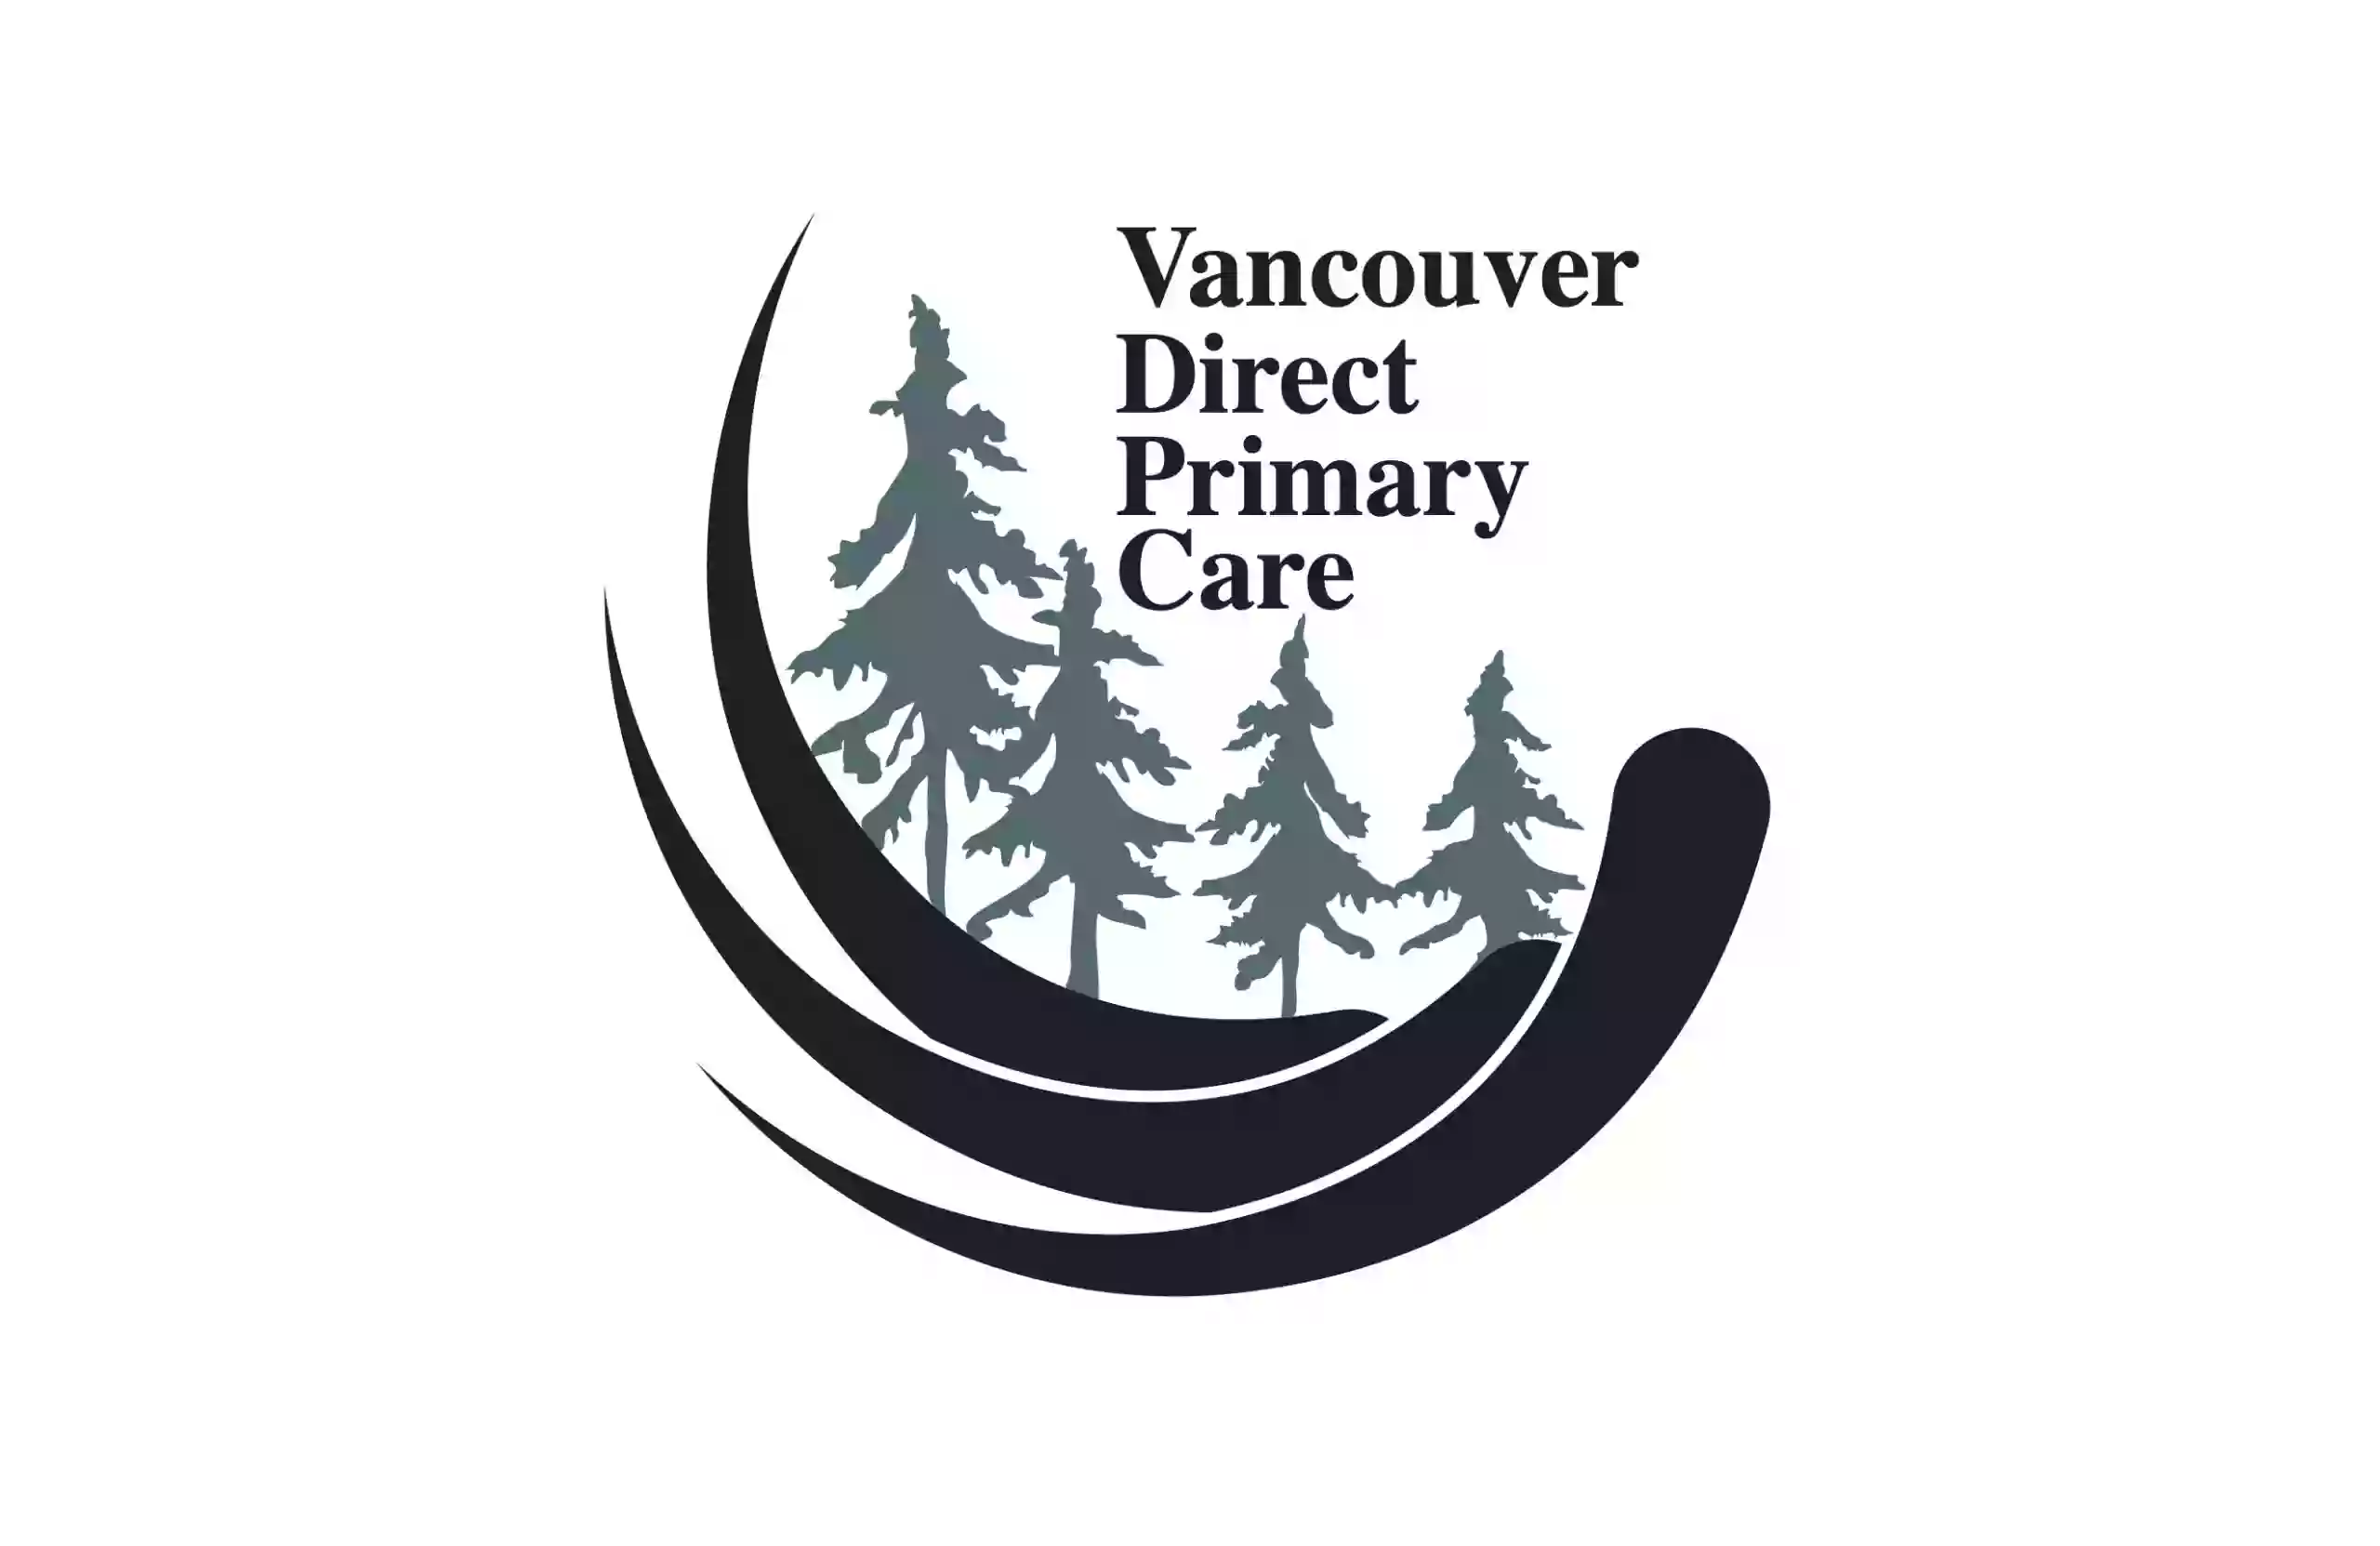 Vancouver Direct Primary Care